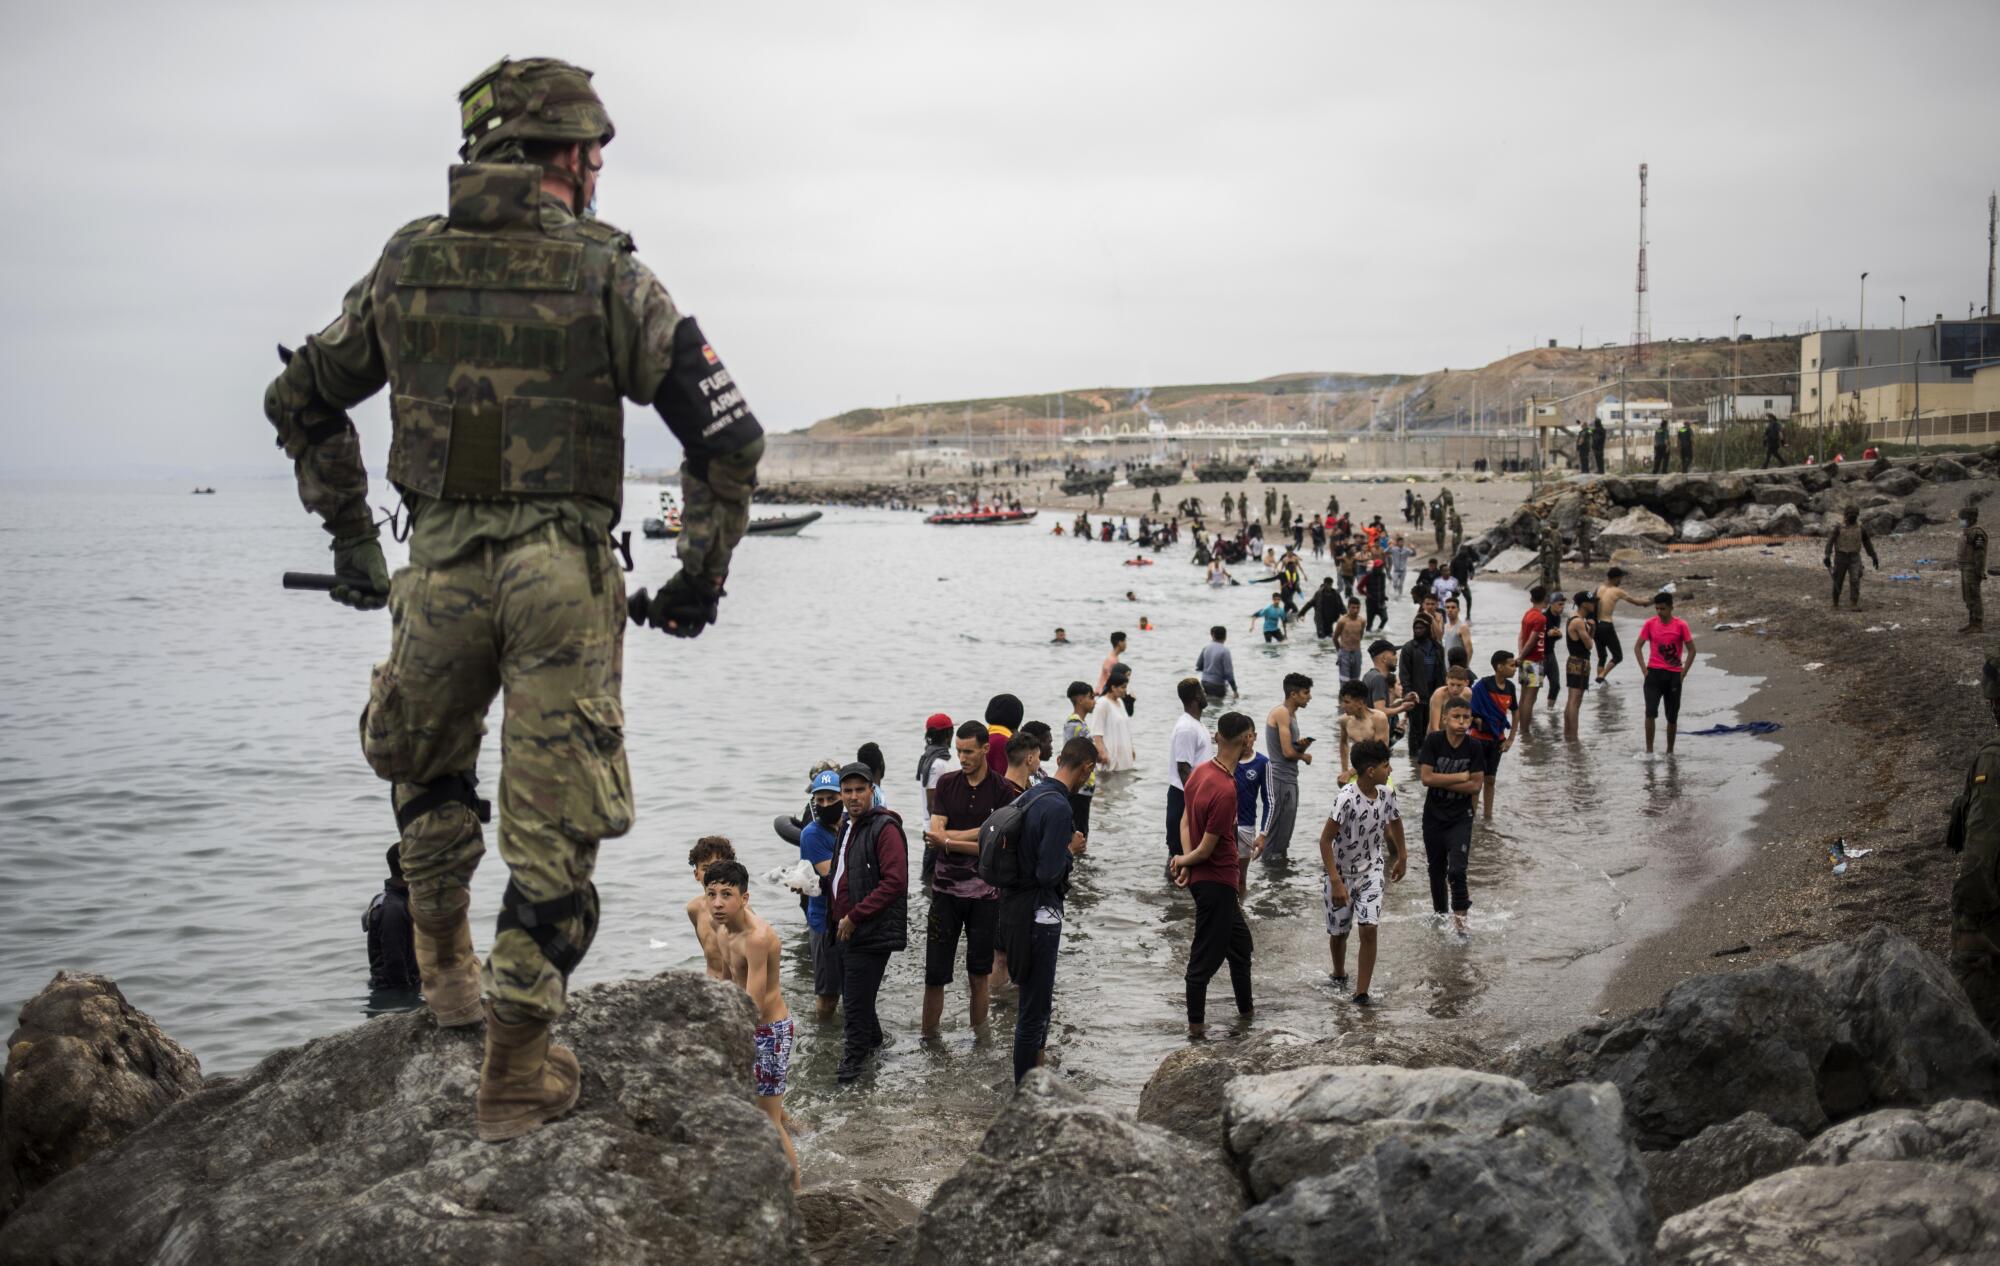 A military member in camo fatigues carrying a baton stands on a rock overlooking dozens of migrants exiting the sea